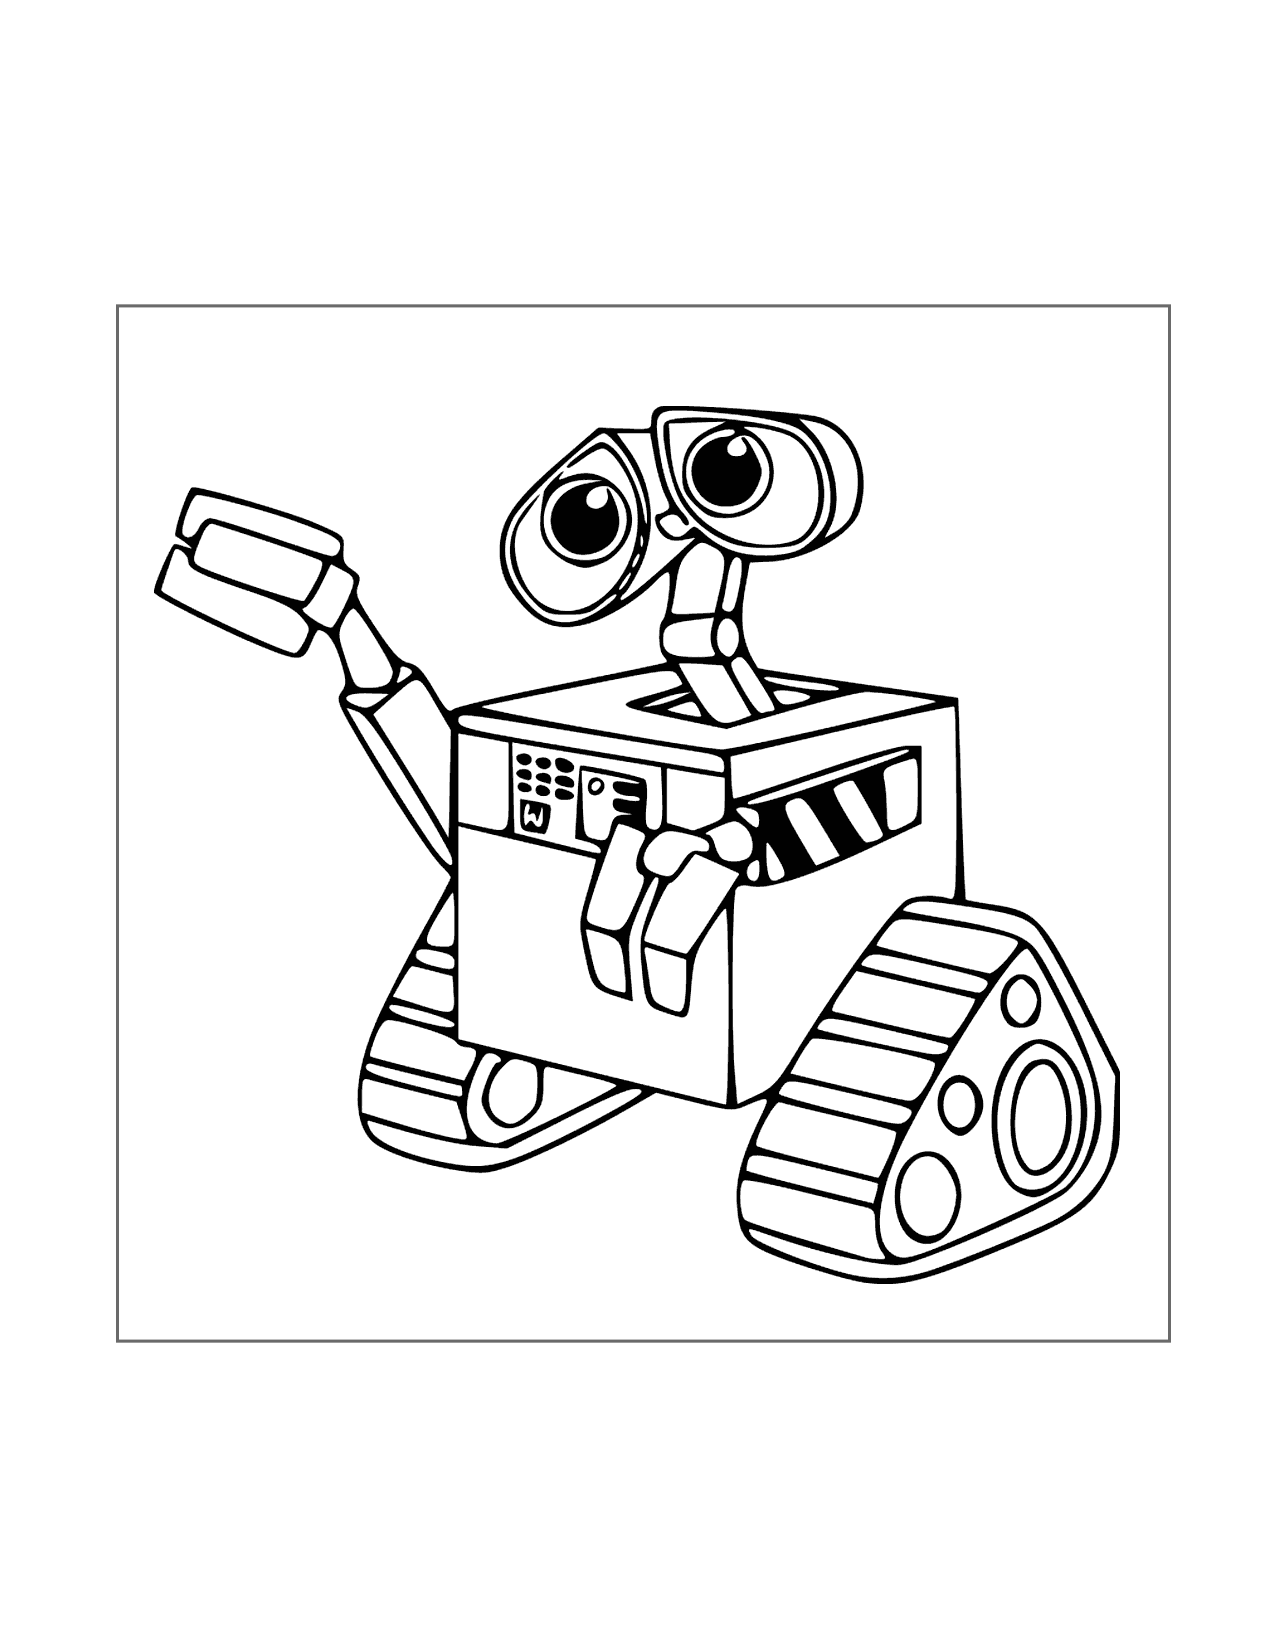 Cute Wall E Coloring Page